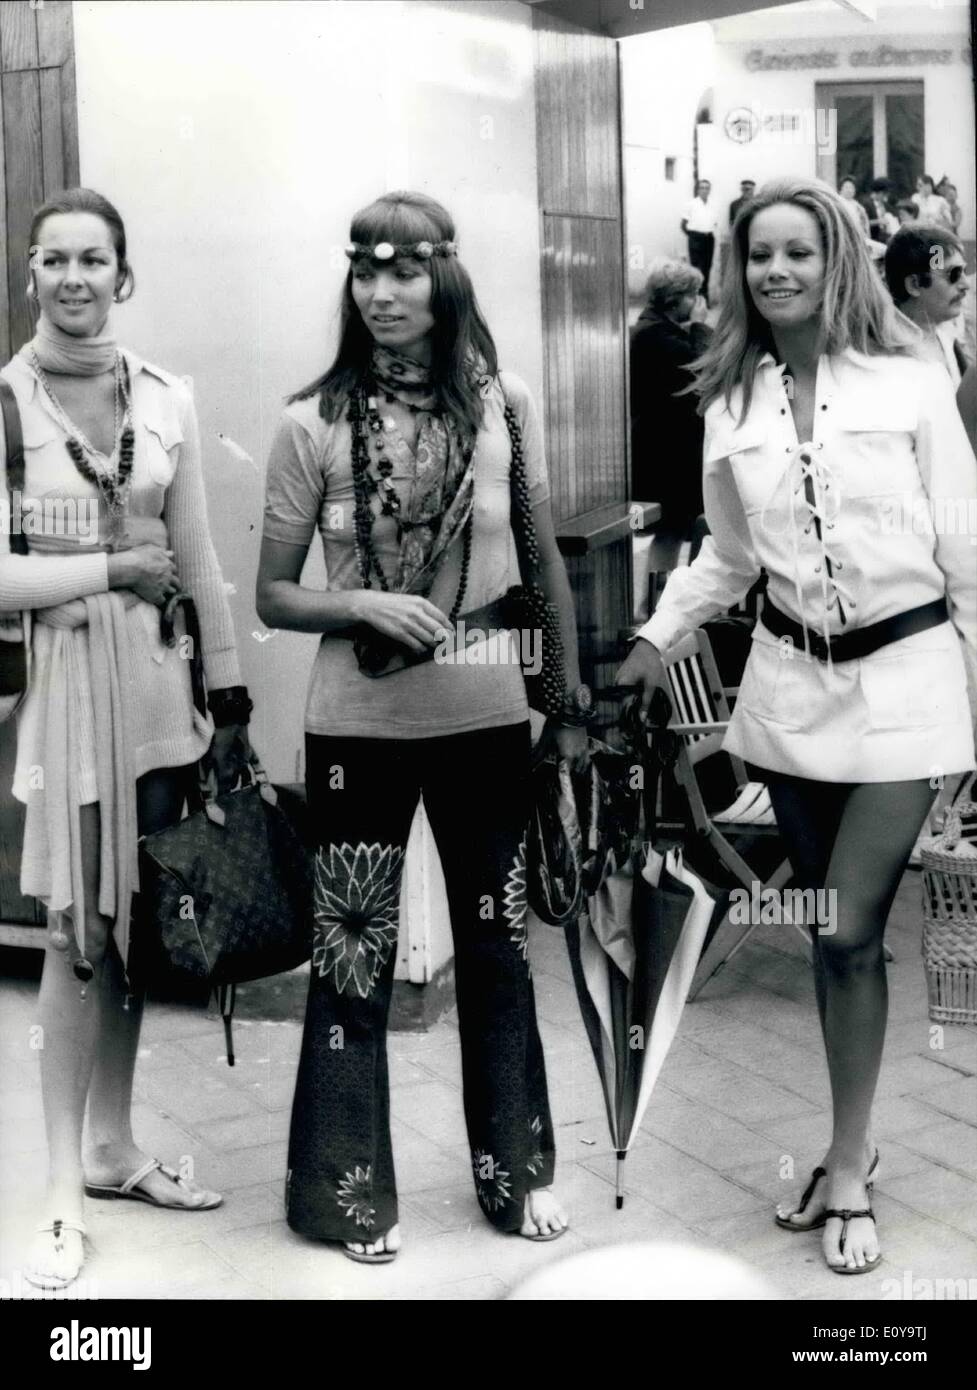 Sep. 09, 1969 - They are at a hate-couture fashion show in Capri. Some of  the